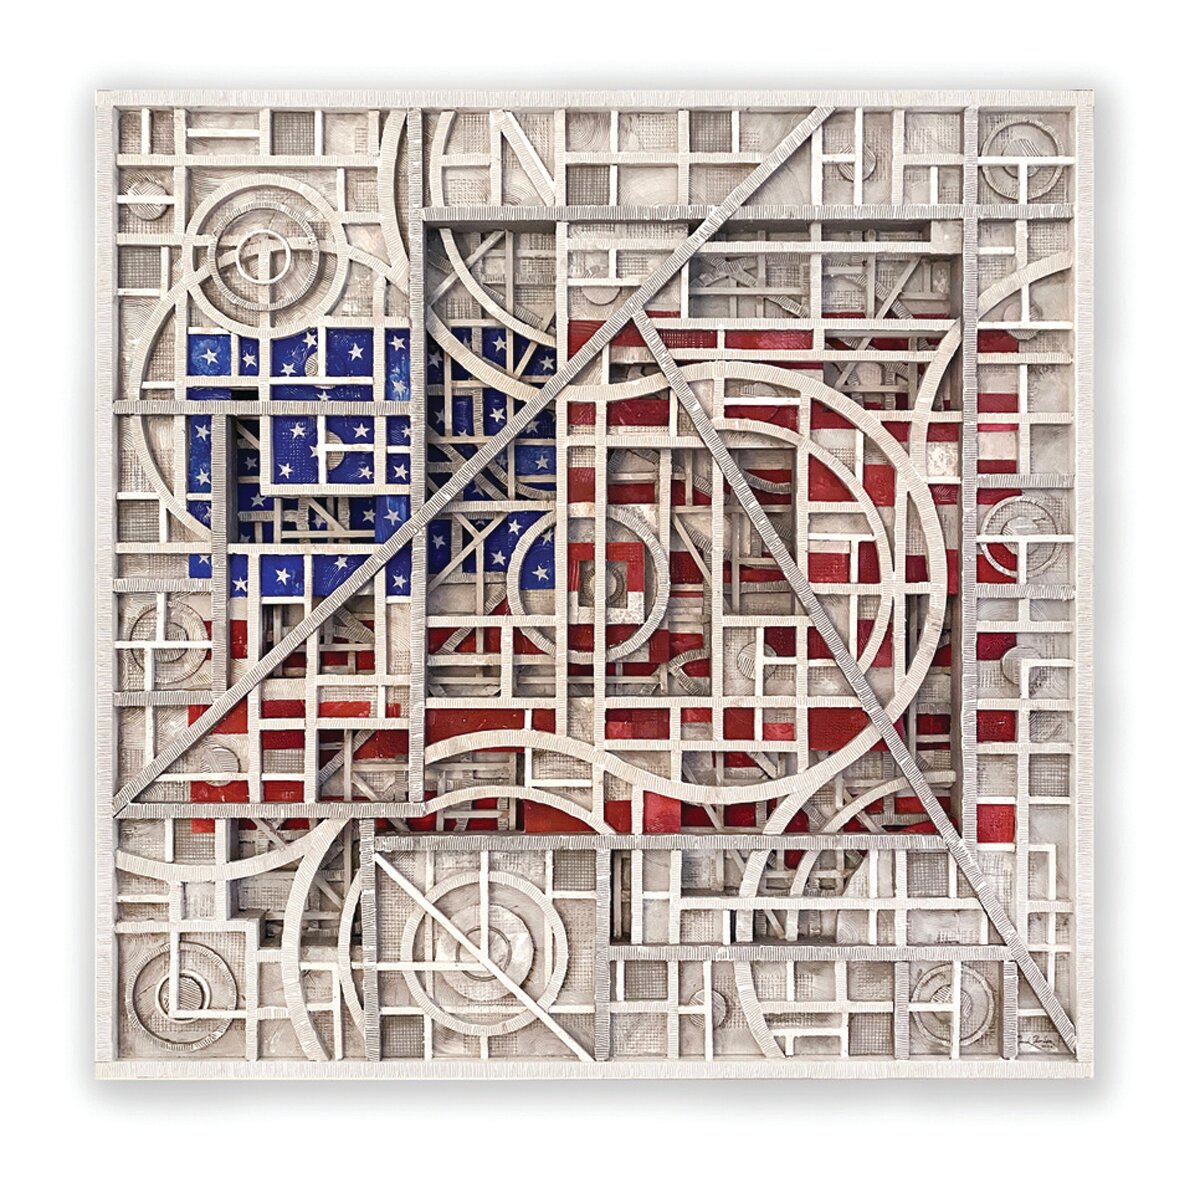 “Star Spangled” by Chuck Fischer is made of aluminum, wood, modeling paste, metal wire, gesso and acrylic.